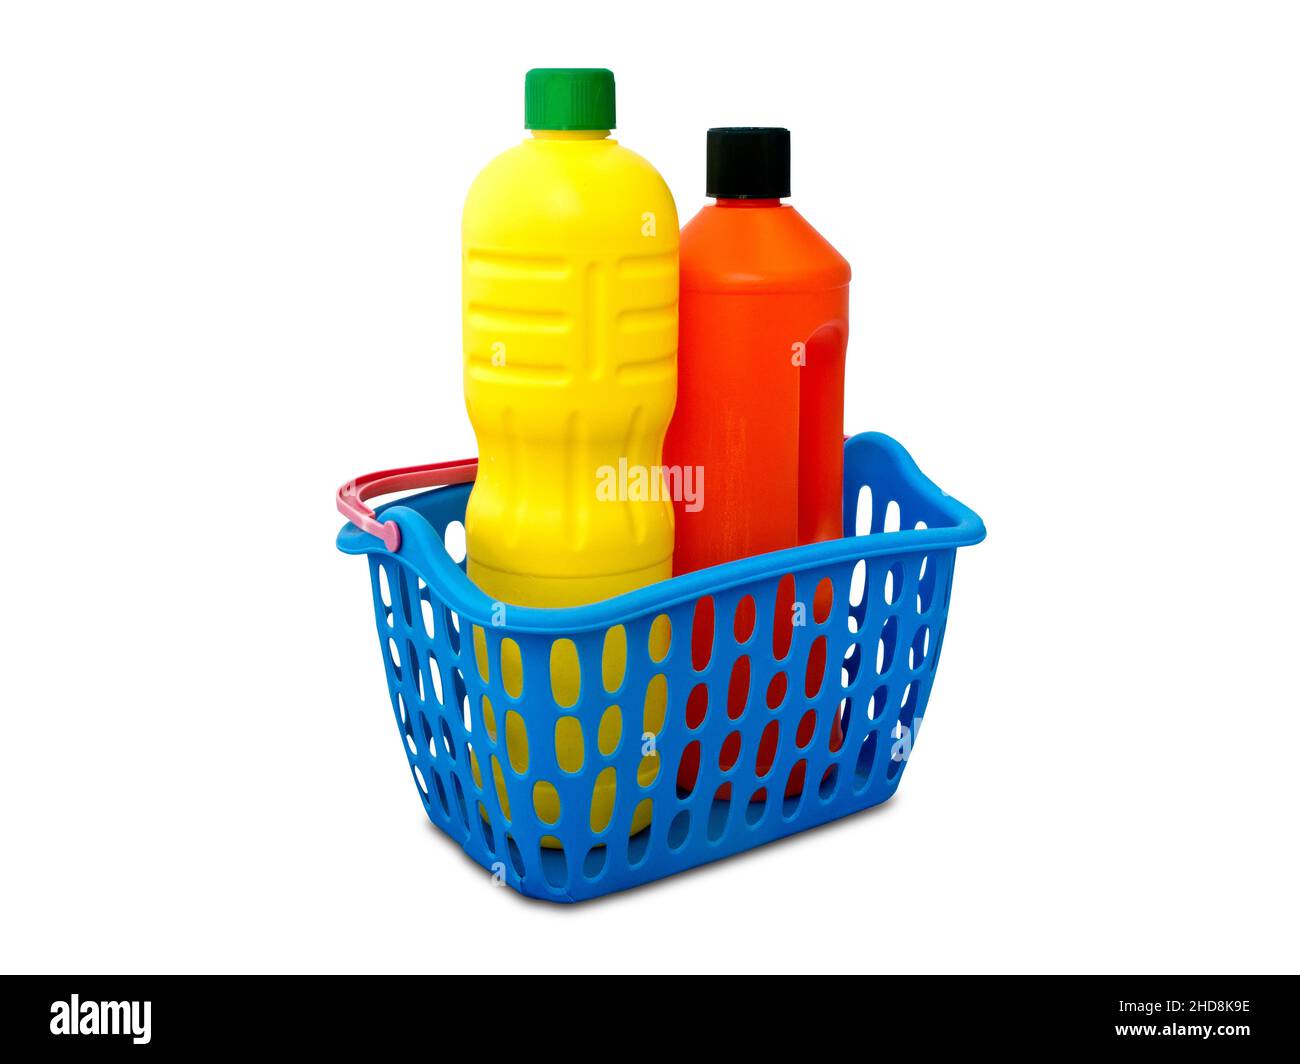 Cleaning products isolated on white background Stock Photo